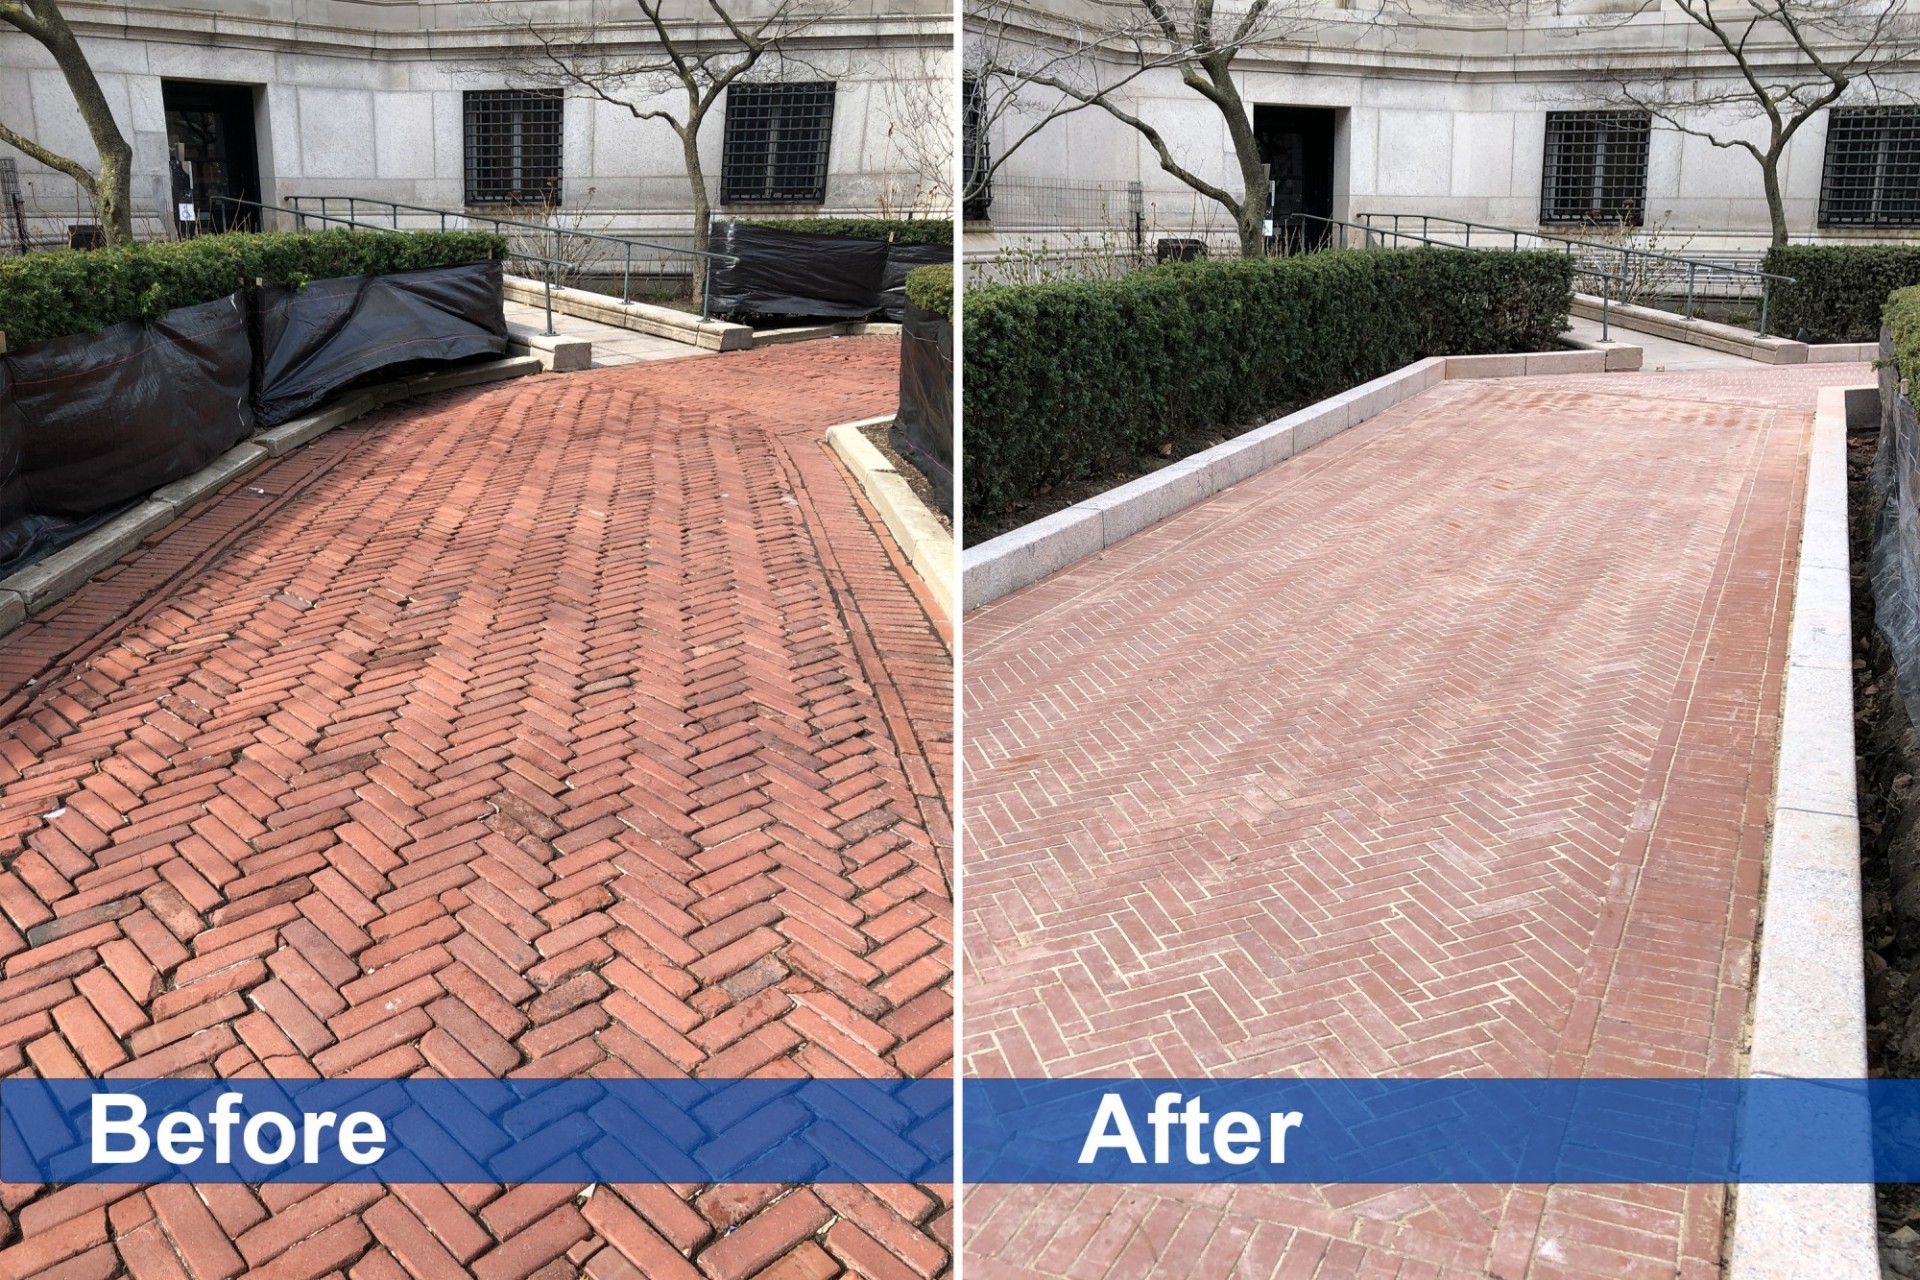 Before and after photos of the brick paver replacement at the northeast entrance to Low Library